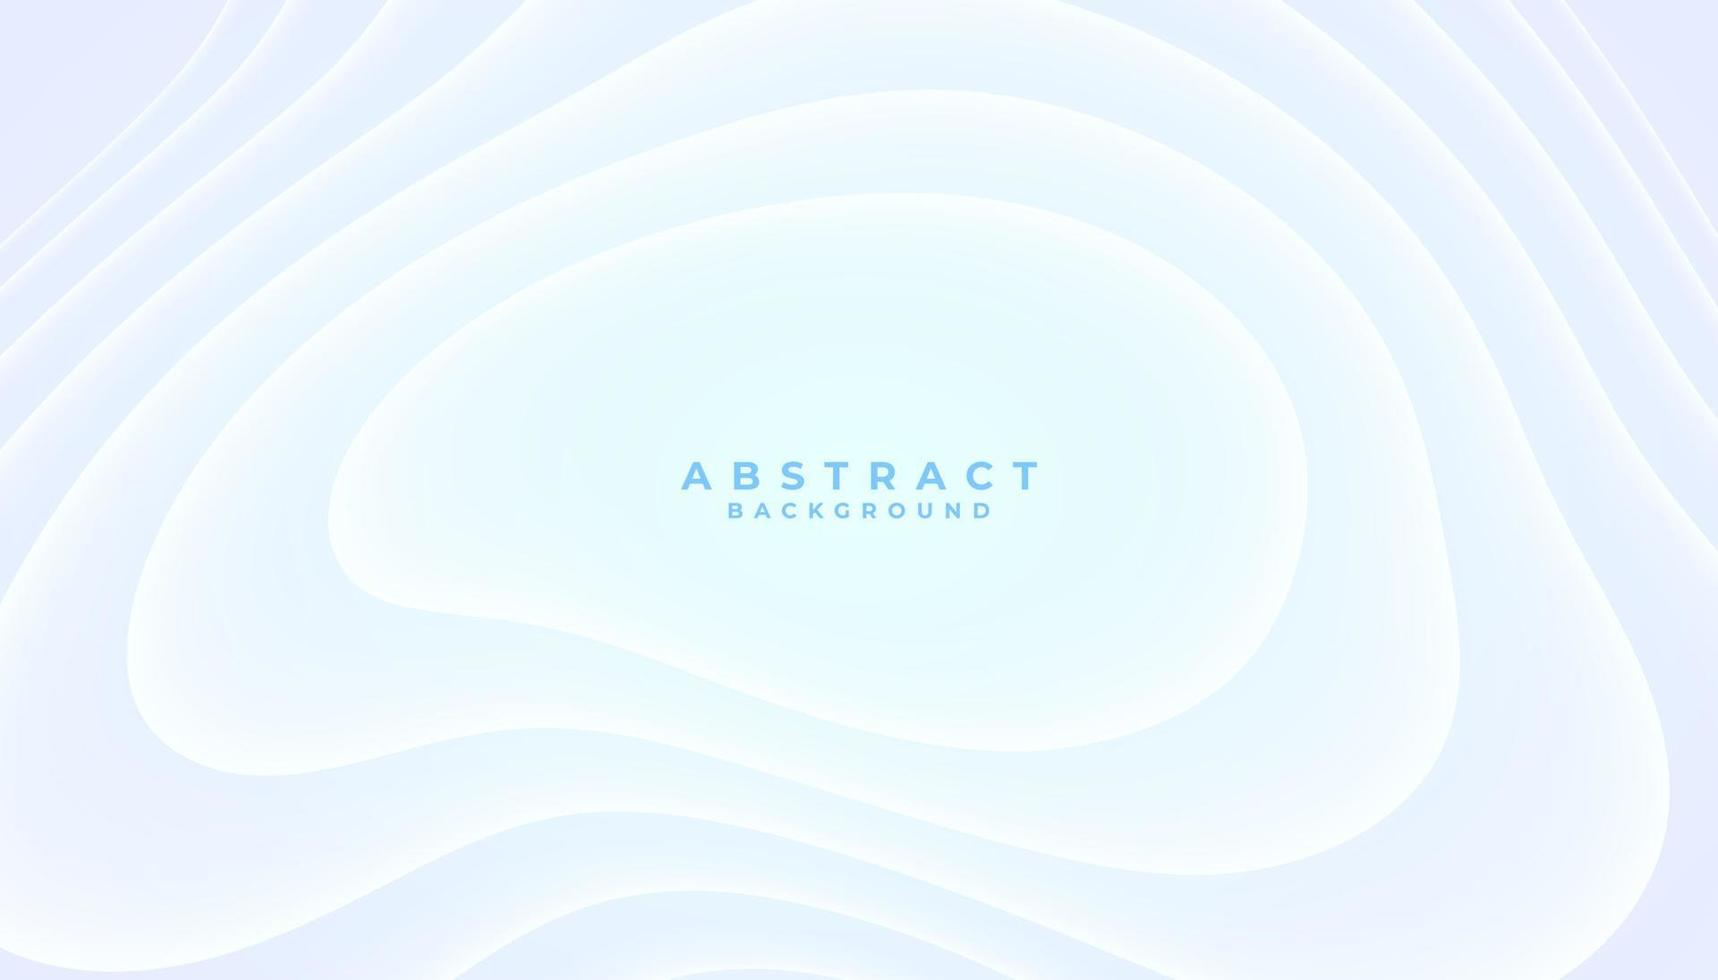 Abstract modern gradient white fluid shapes composition background. Landing page, flyer, banner, card. Vector